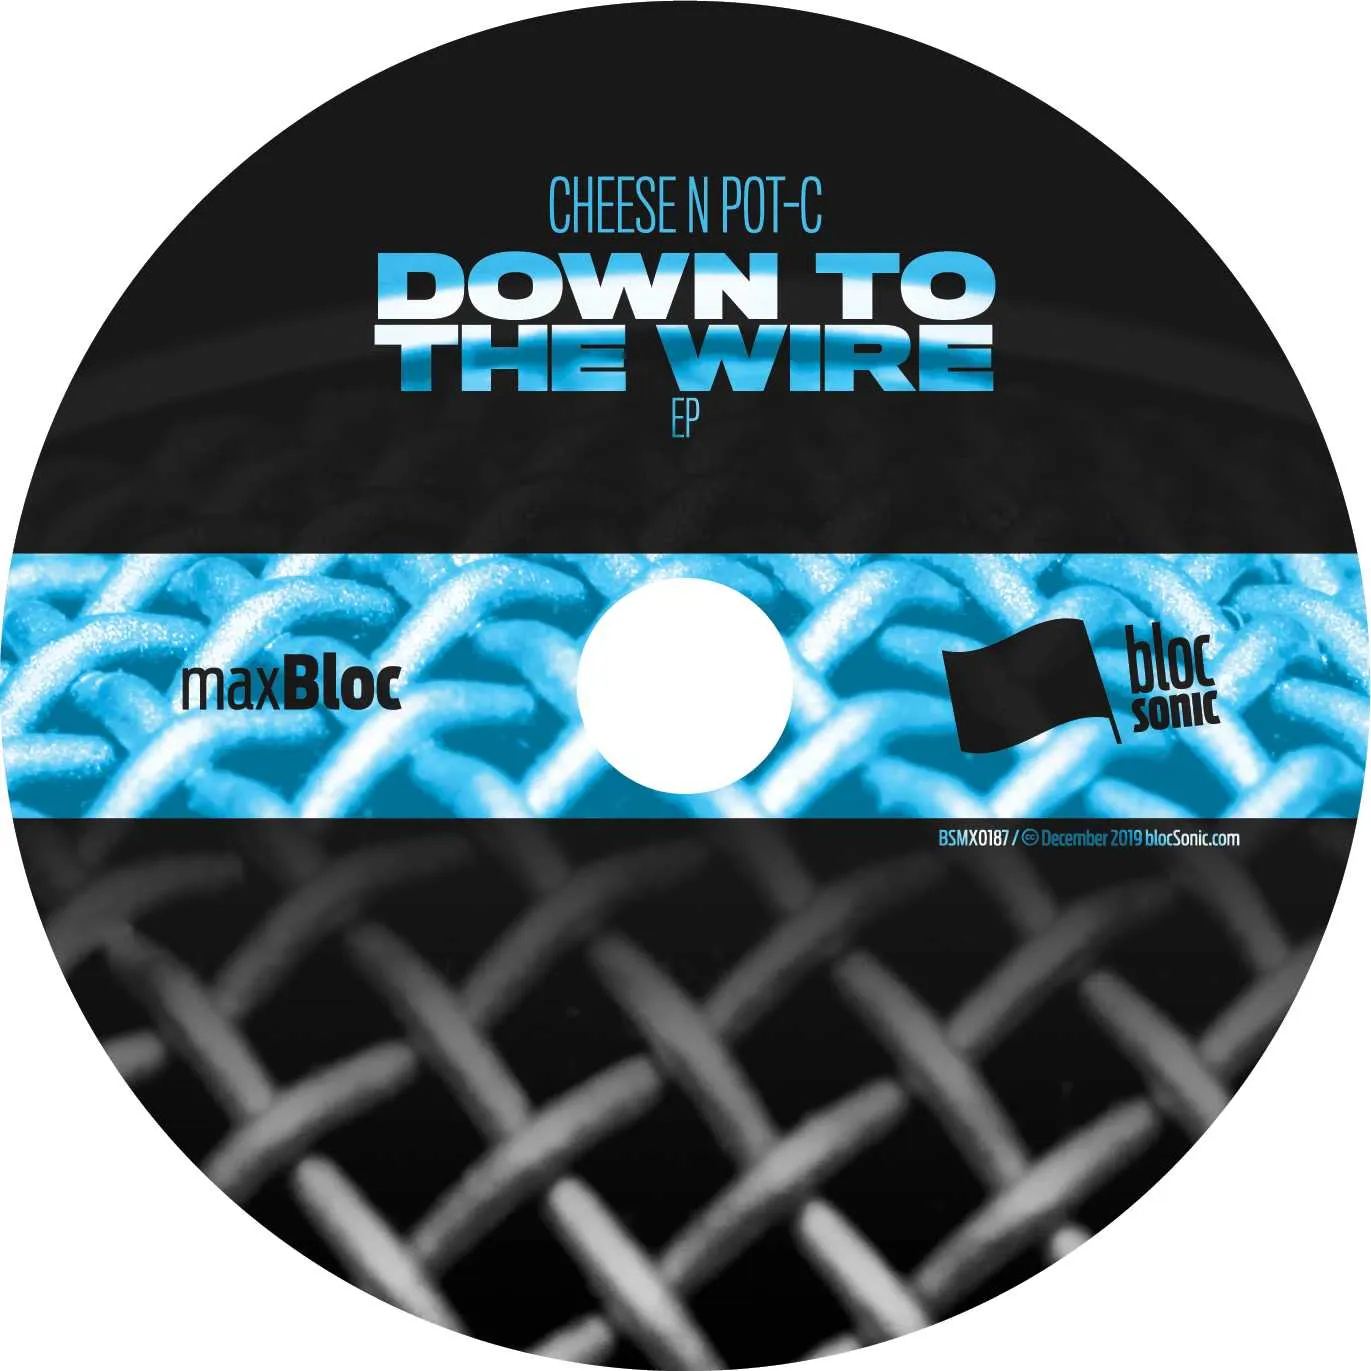 Album disc for “Down To The Wire EP” by Cheese N Pot-C